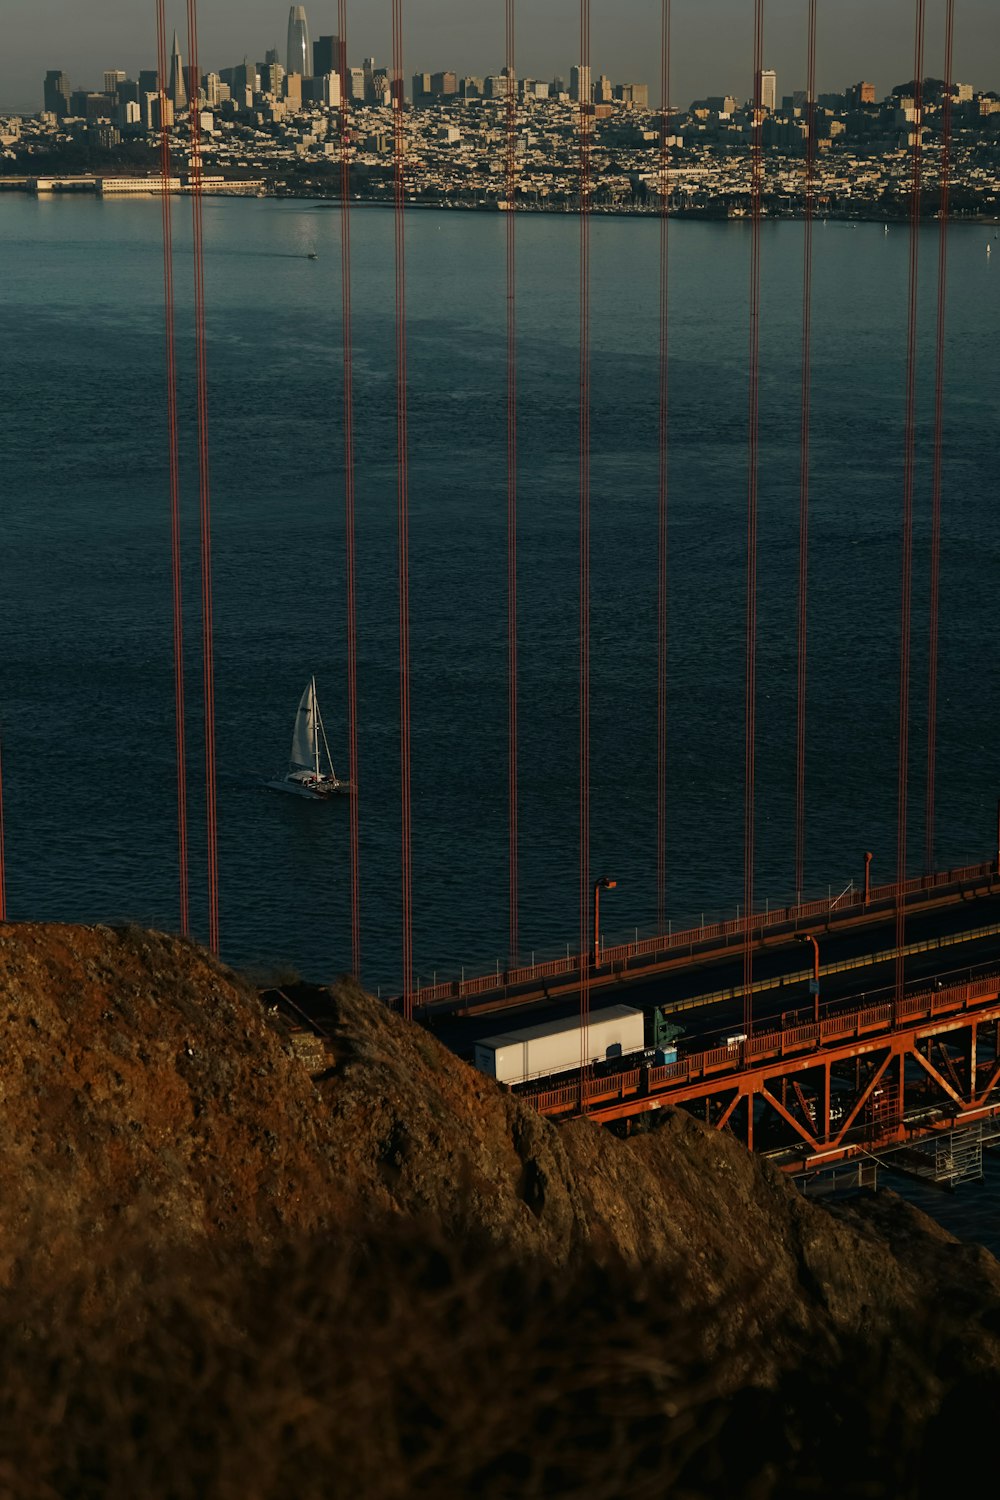 a view of the golden gate bridge with a sailboat in the water